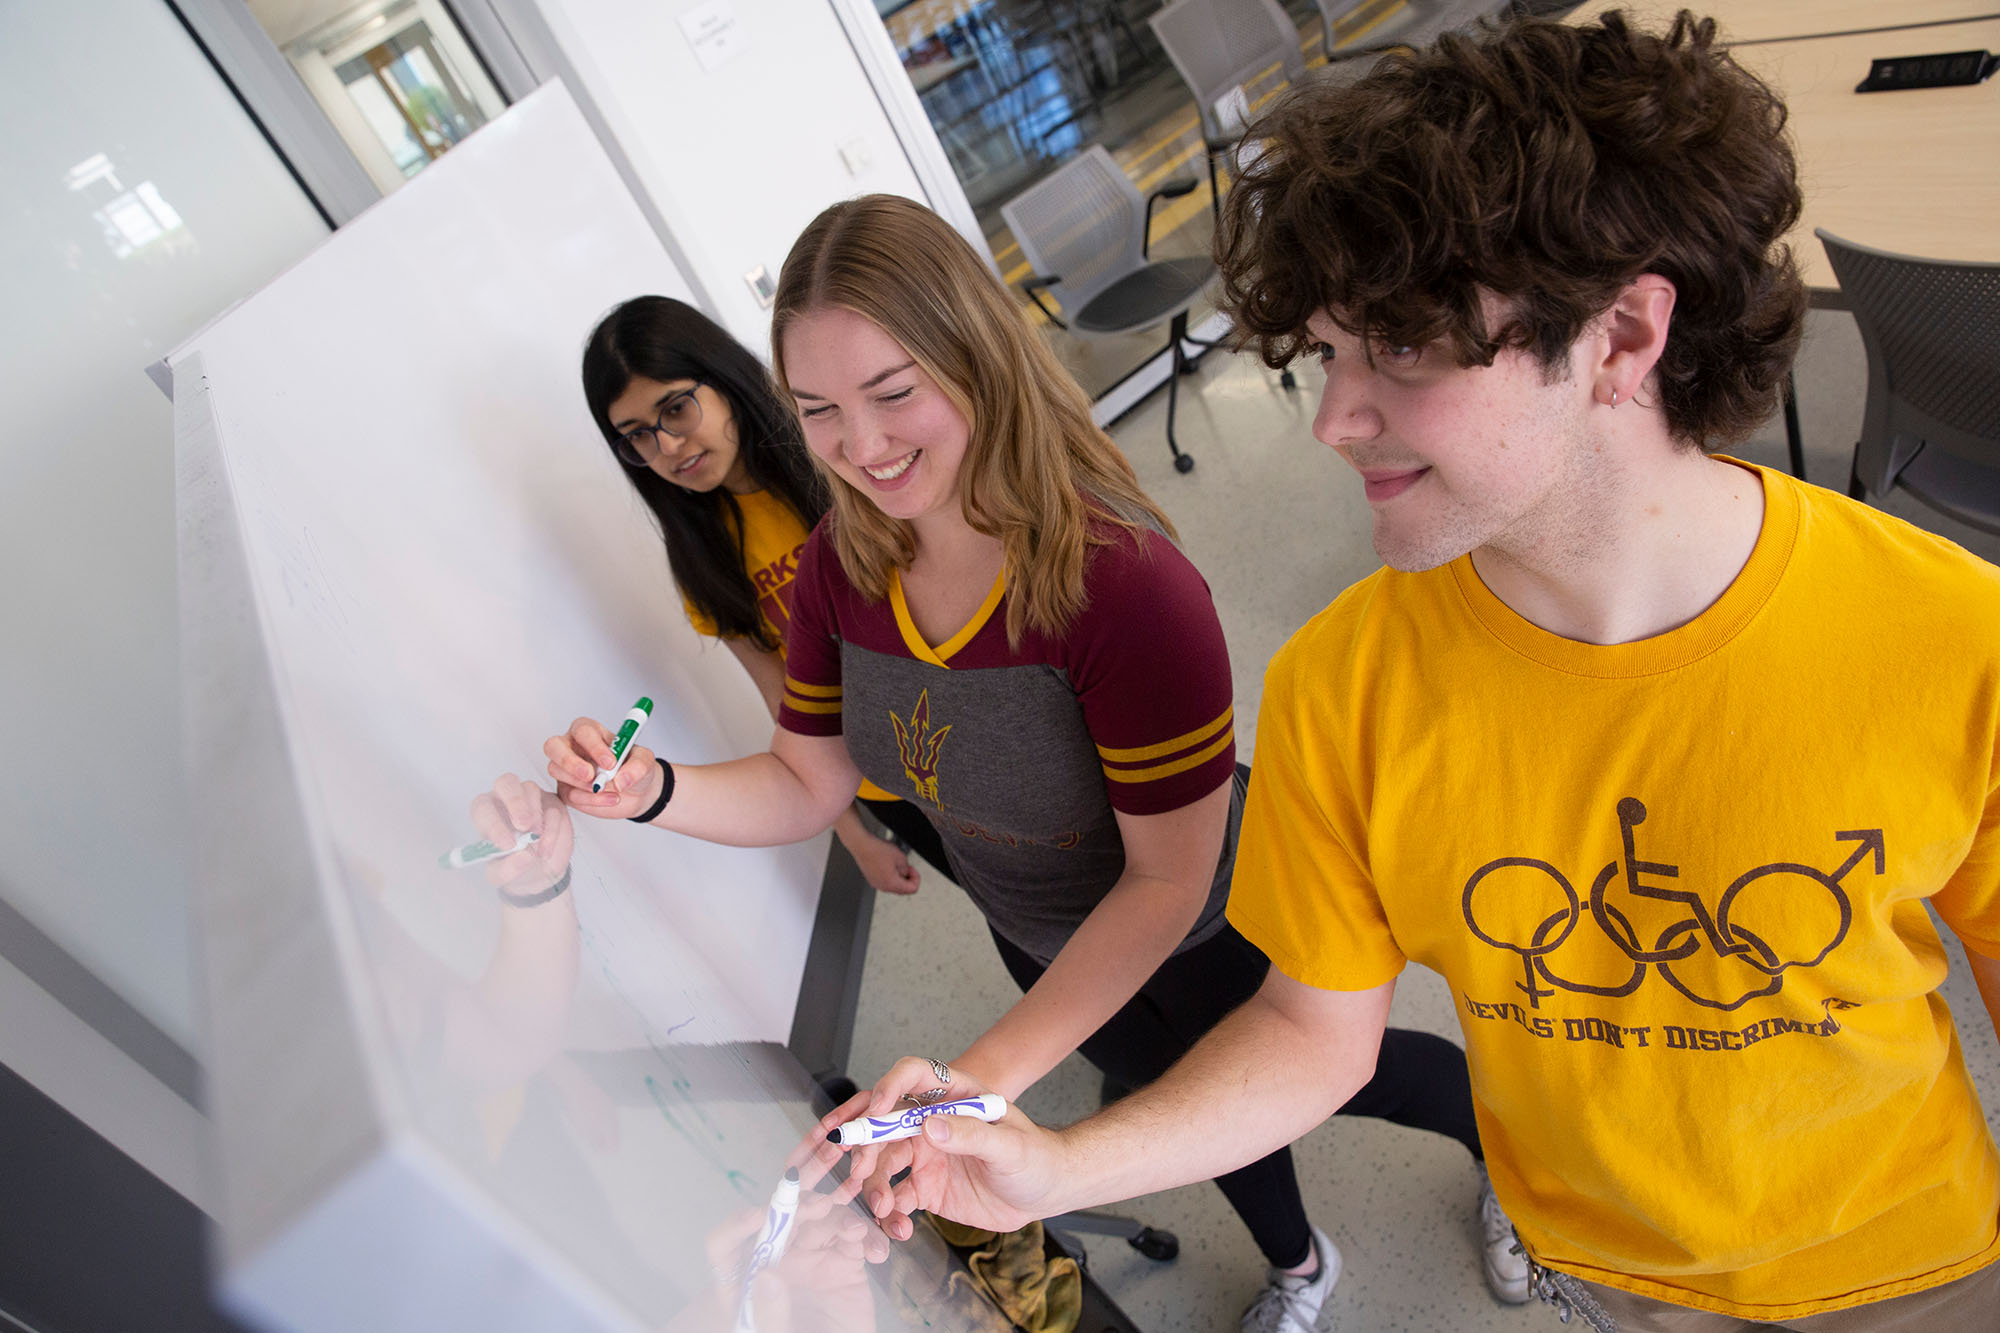 Three ASU students, two women and one man, stand at a white board, writing.